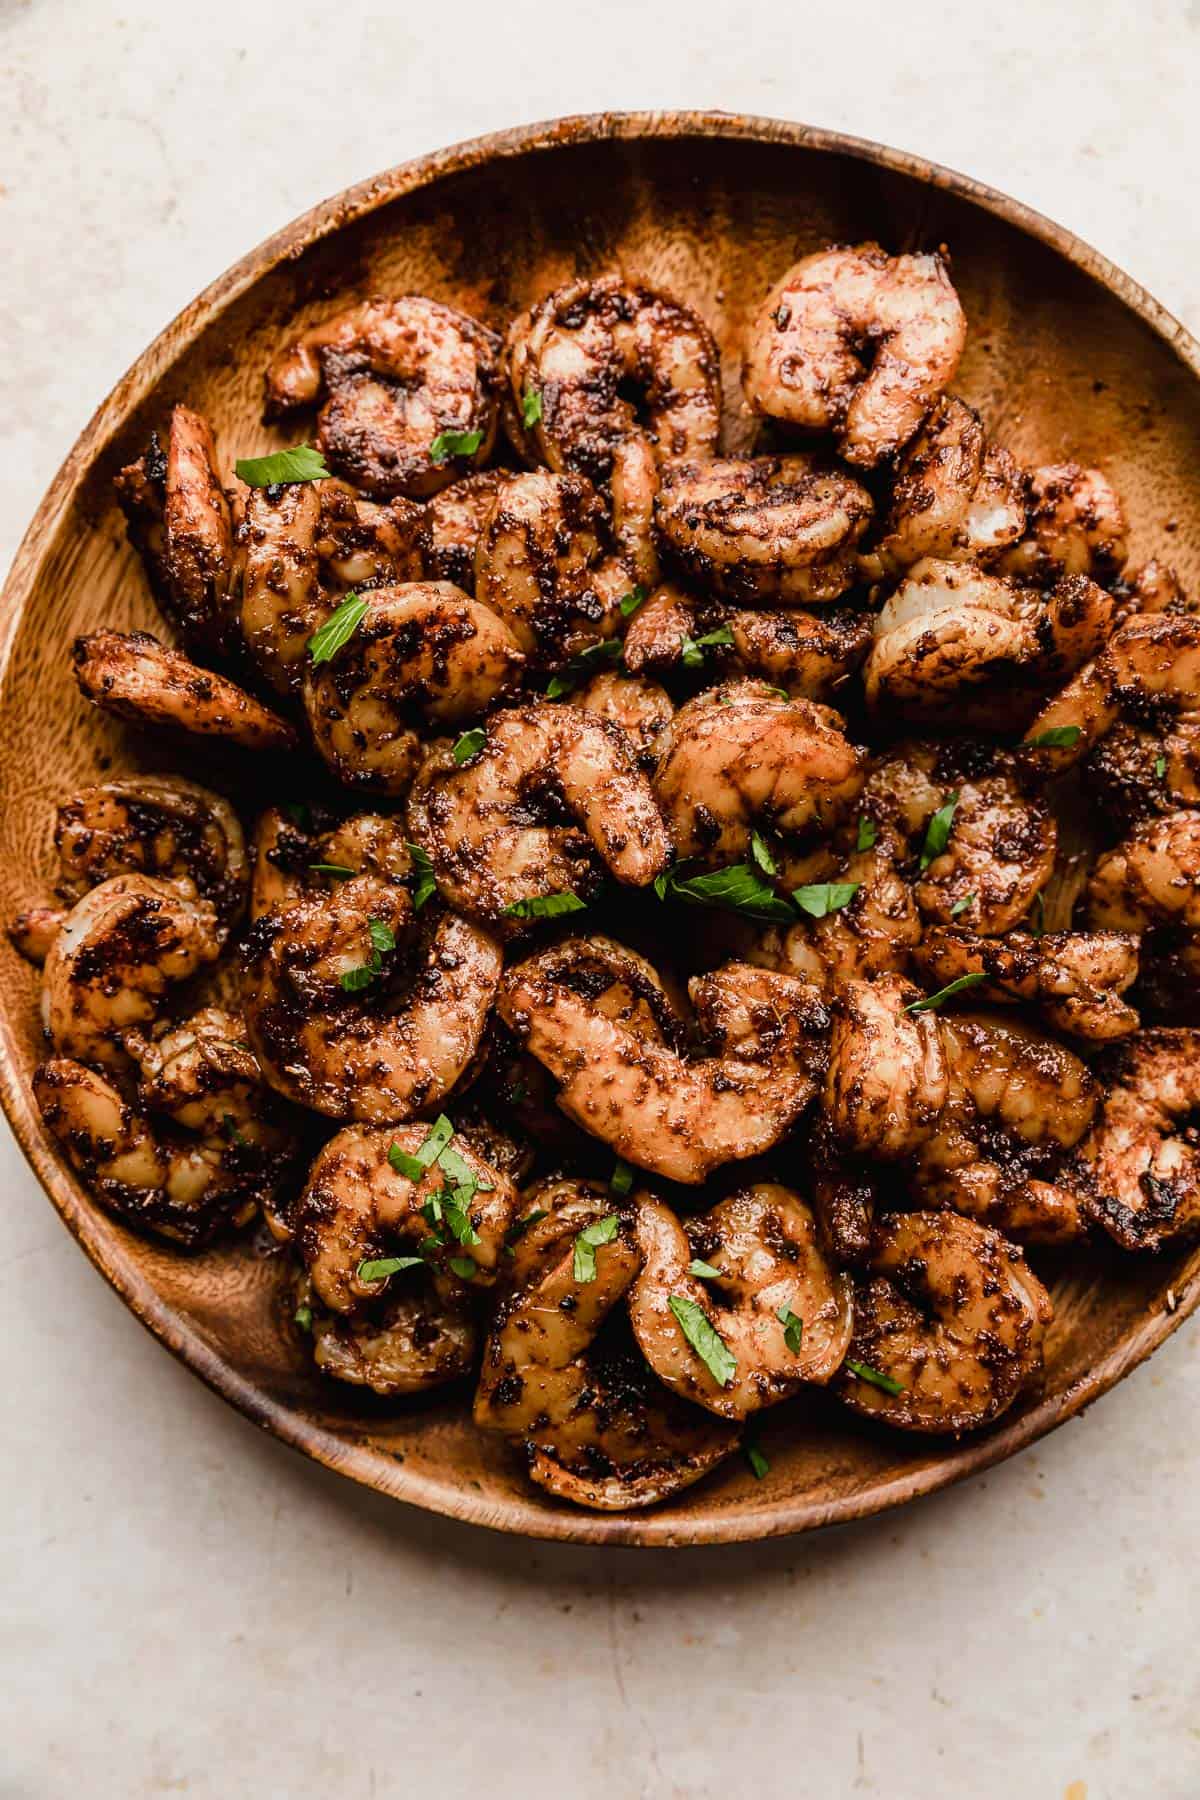 A wood plate on a white background, with cooked Blackened Shrimp on the plate and chopped parsley for garnish.